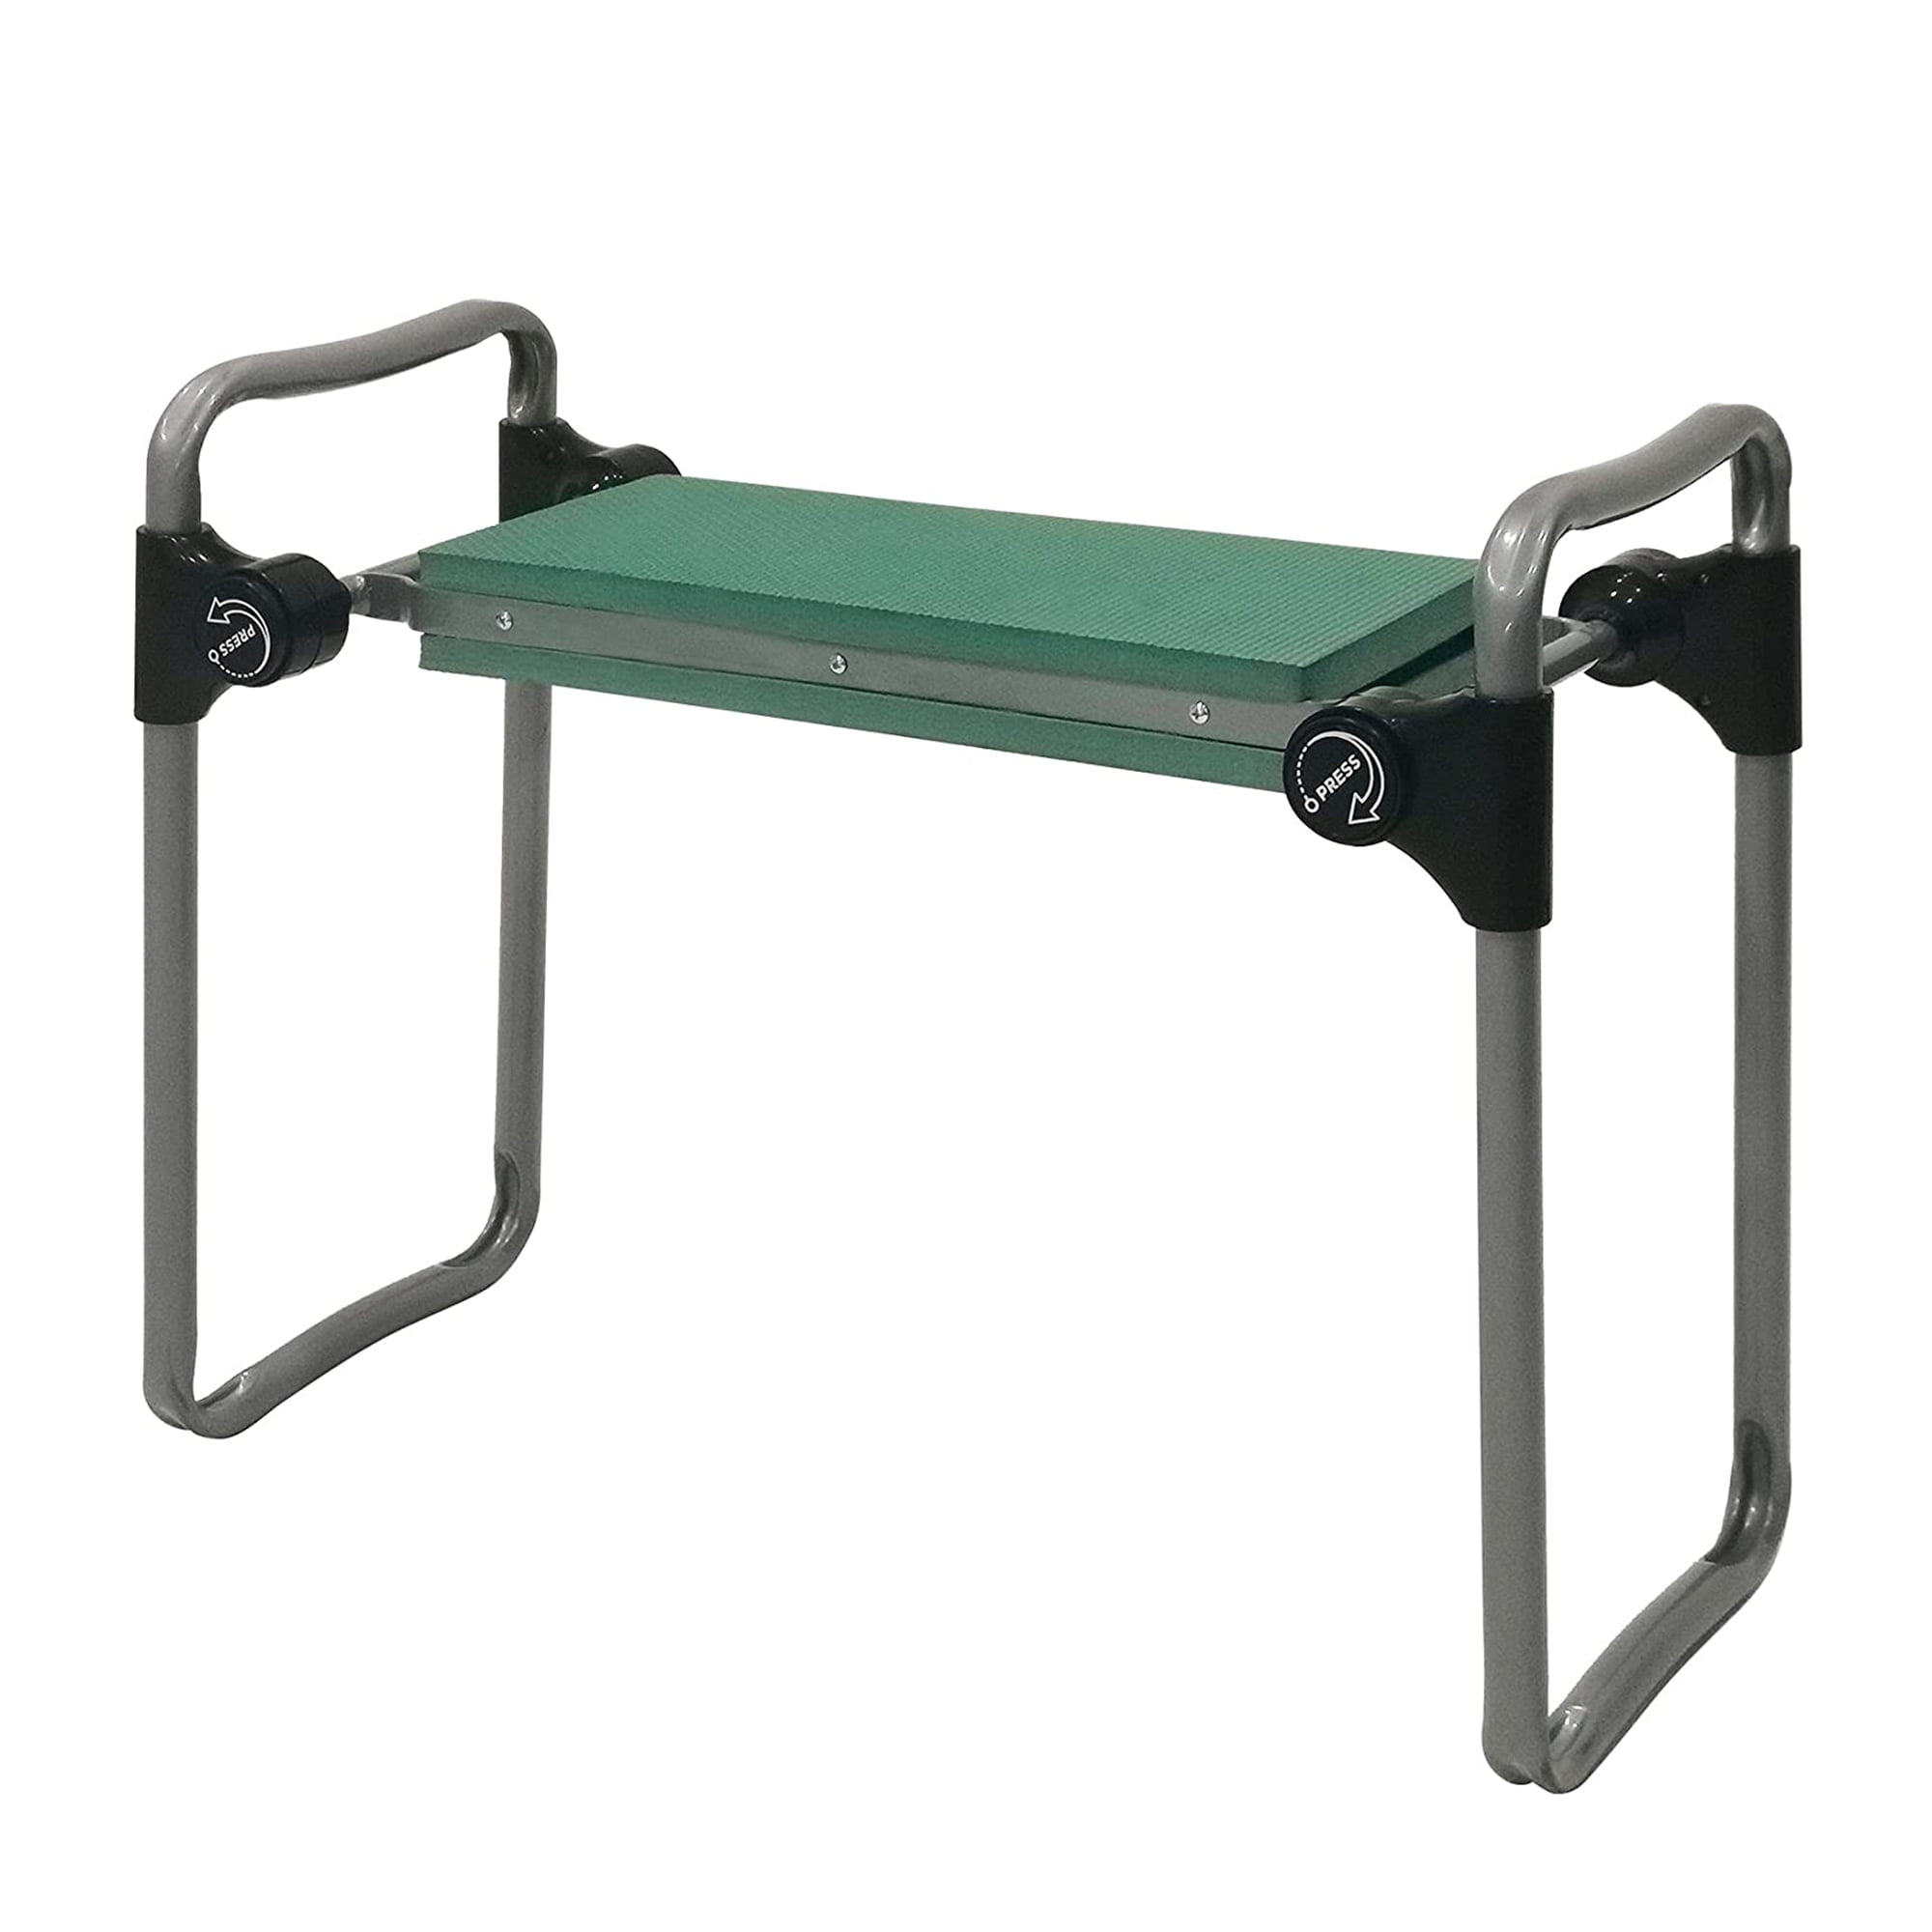 Garden Kneeler Seat Folding Portable Bench Kneeling Pad and Tool Pouch Outdoor 